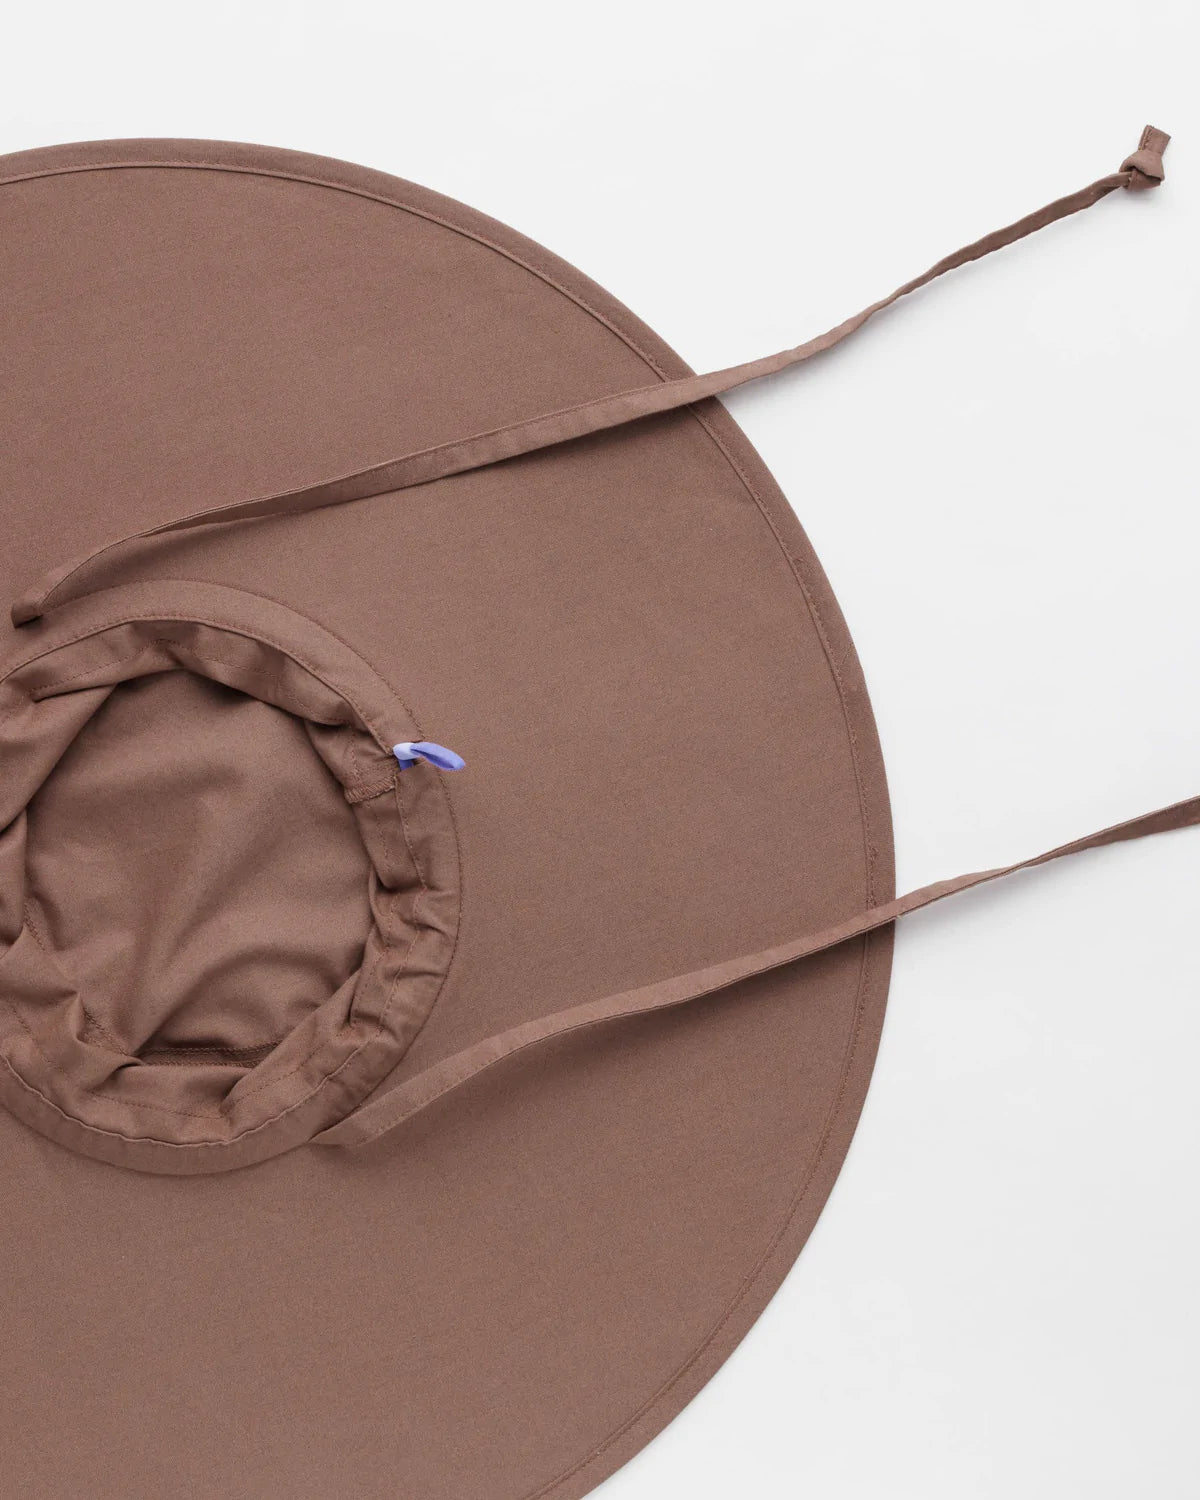 Packable Sun hat - Cocoa